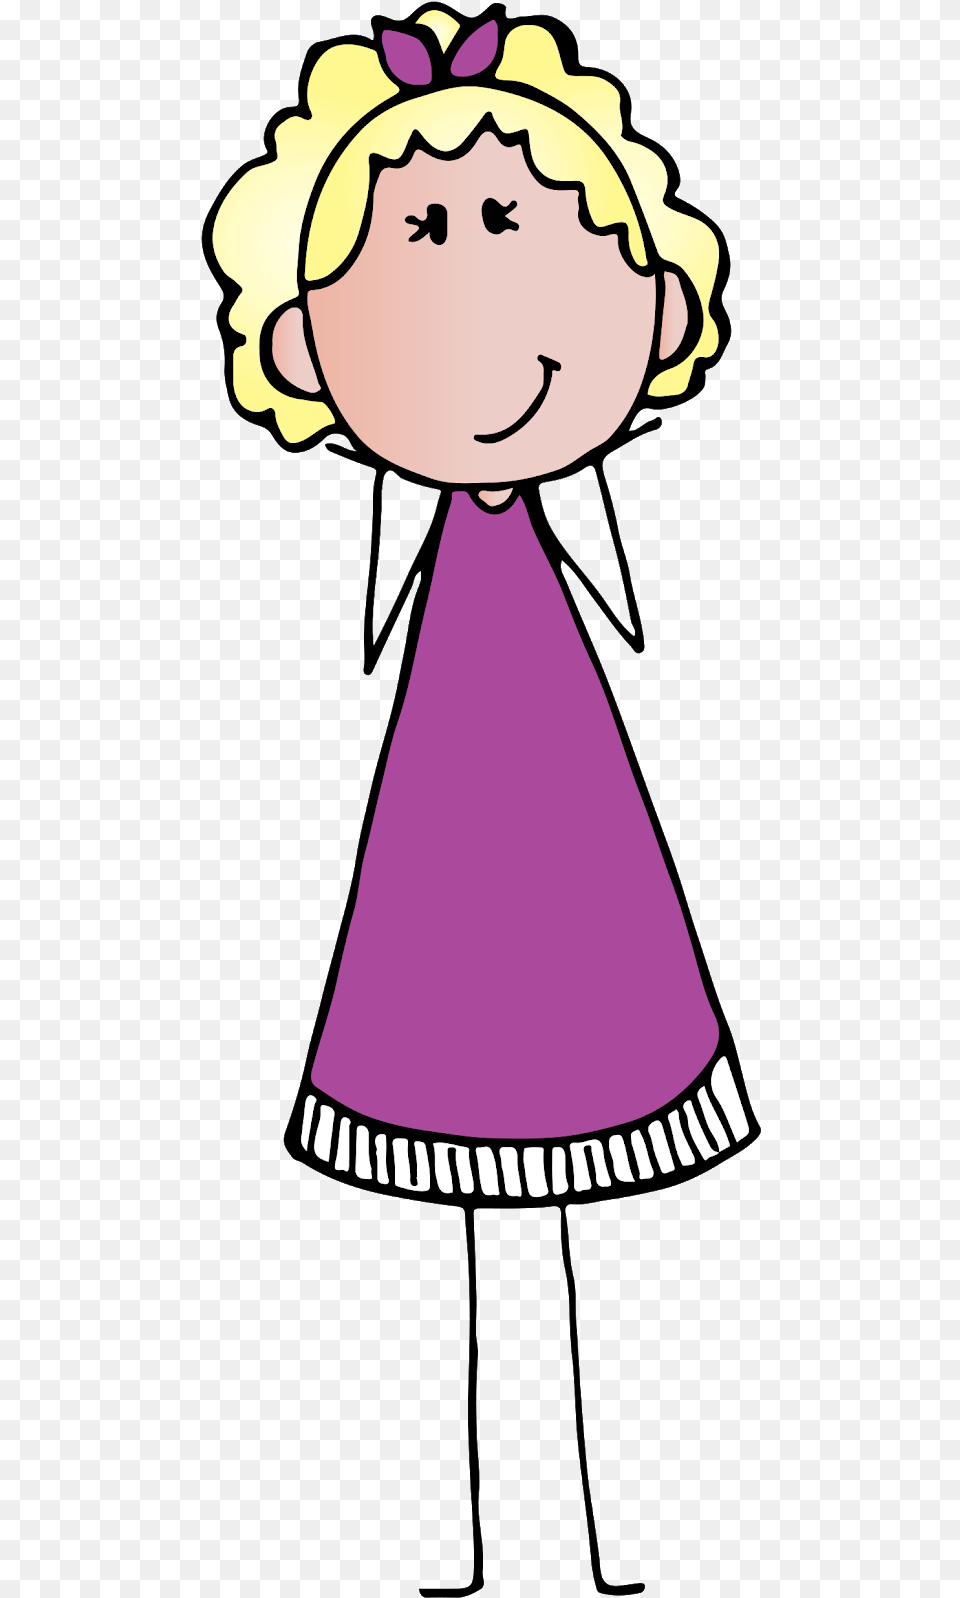 Activity Days For Girls Clip Art The Church Of Jesus Christ Of Latter Day Saints, Clothing, Hat, Person, Face Png Image